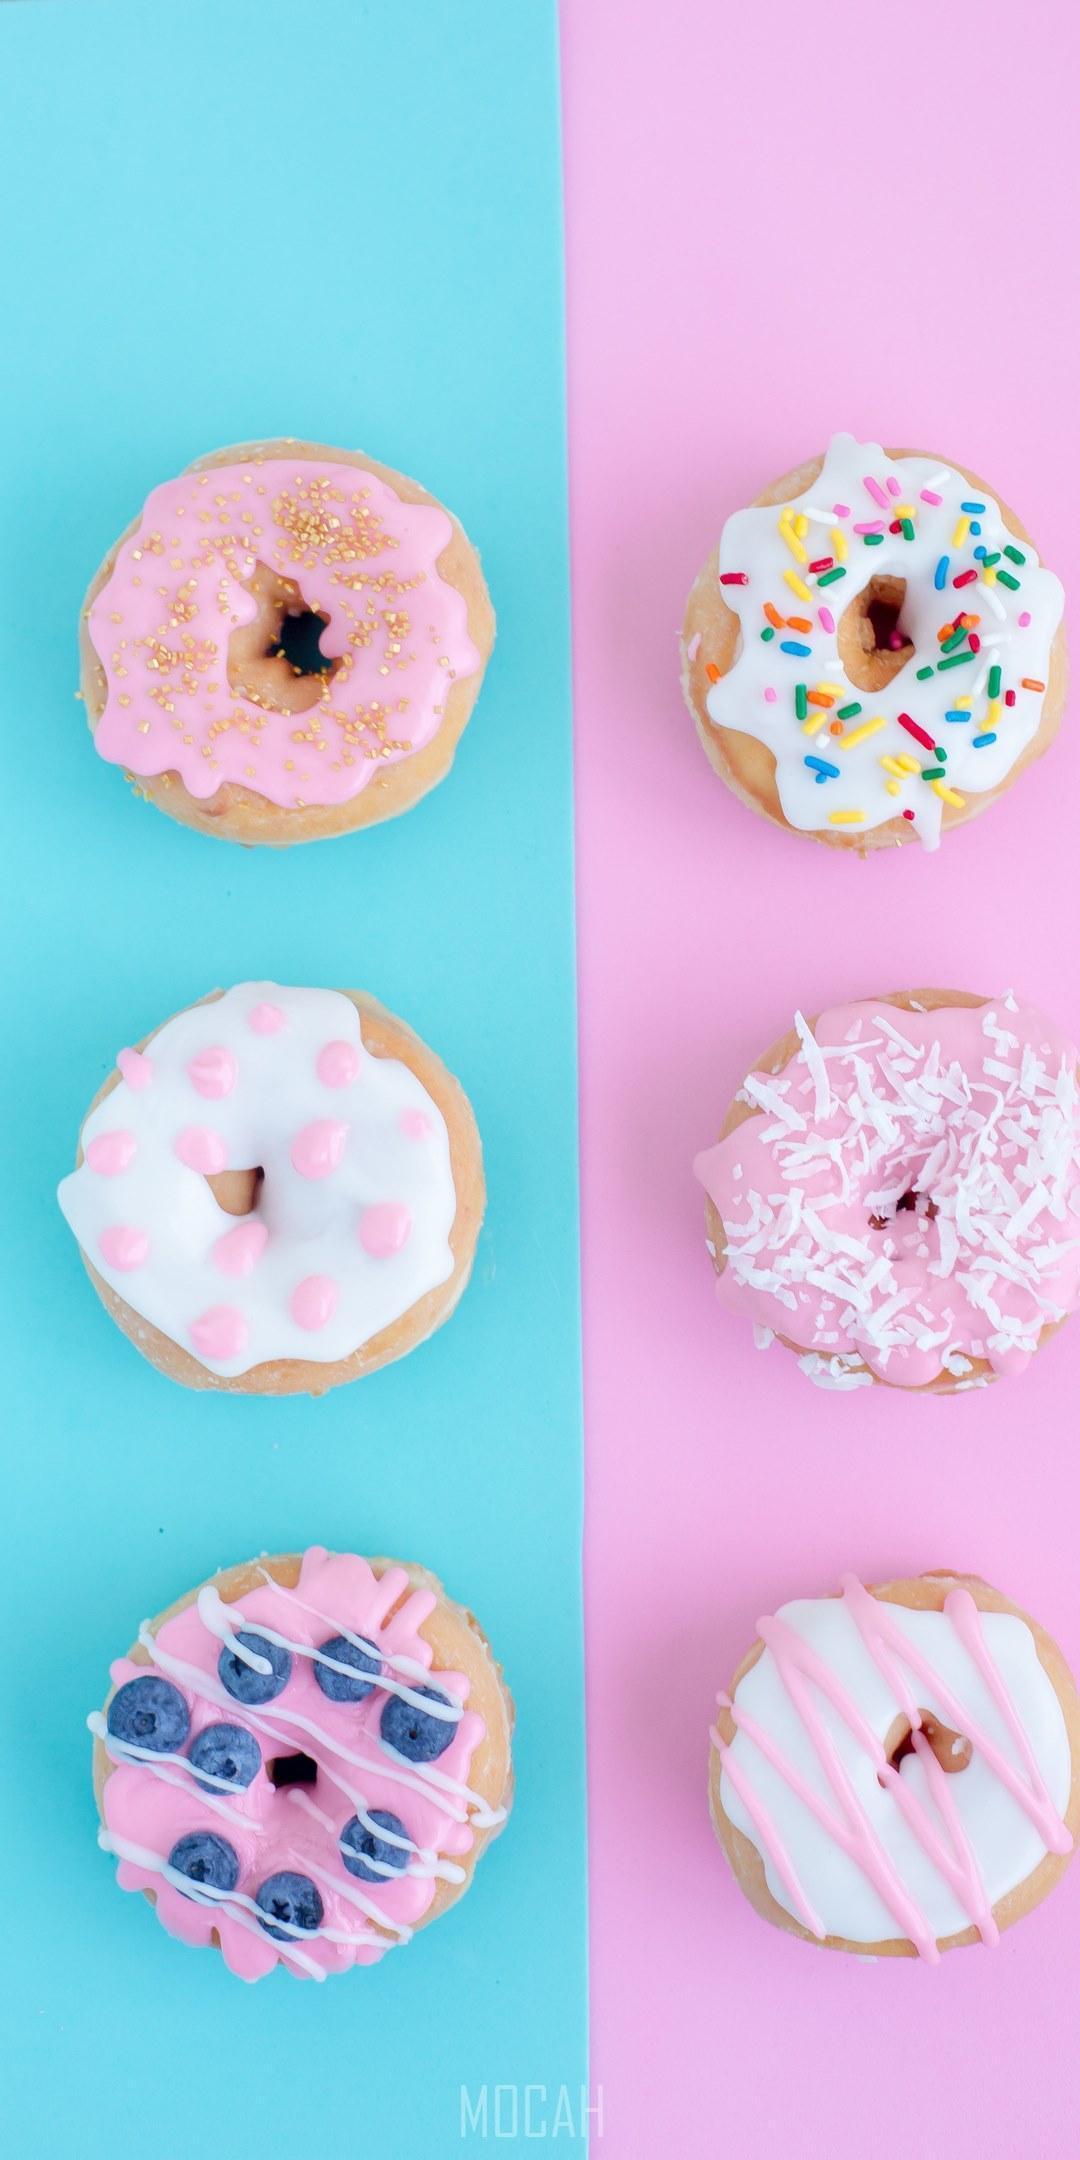 HD wallpaper, Food Cake Donut And Doughnut Hd, 1080X2160, Oneplus 5T Background Hd